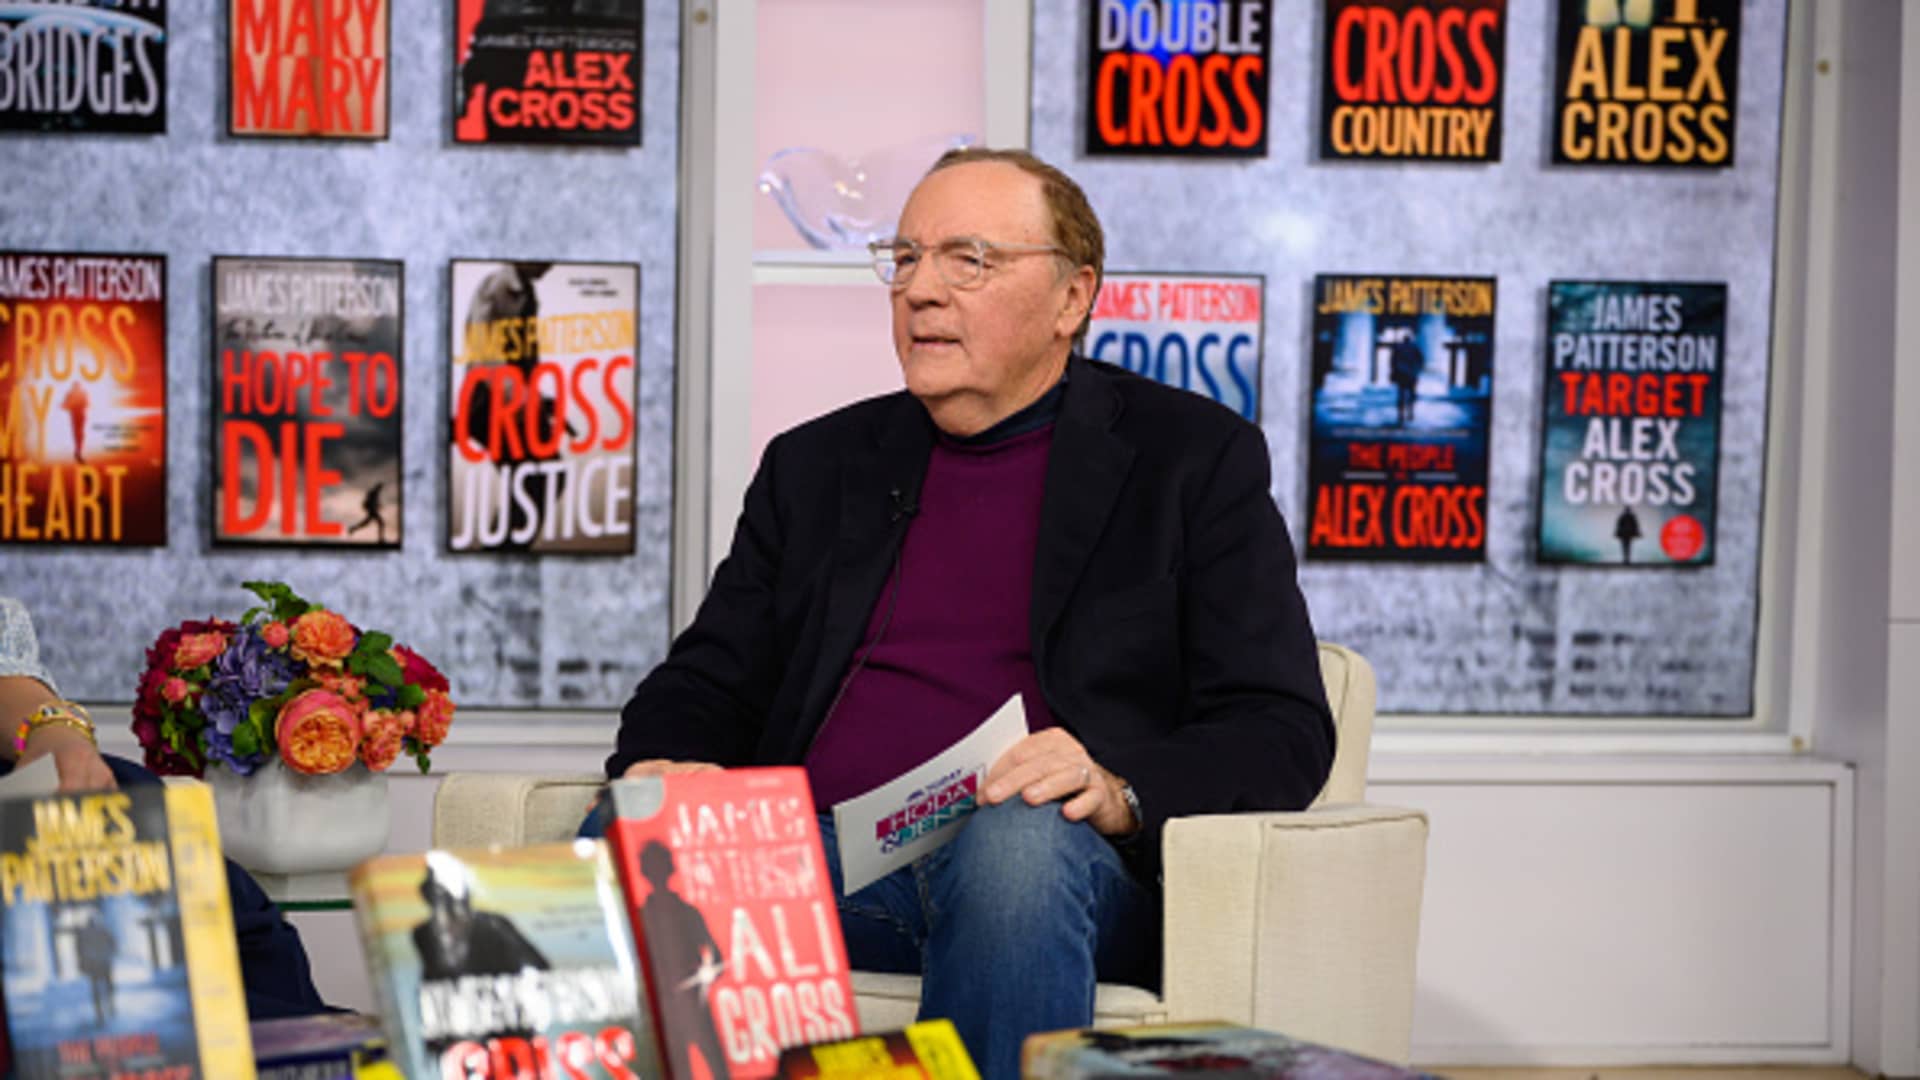 What inspired James Patterson to become an author